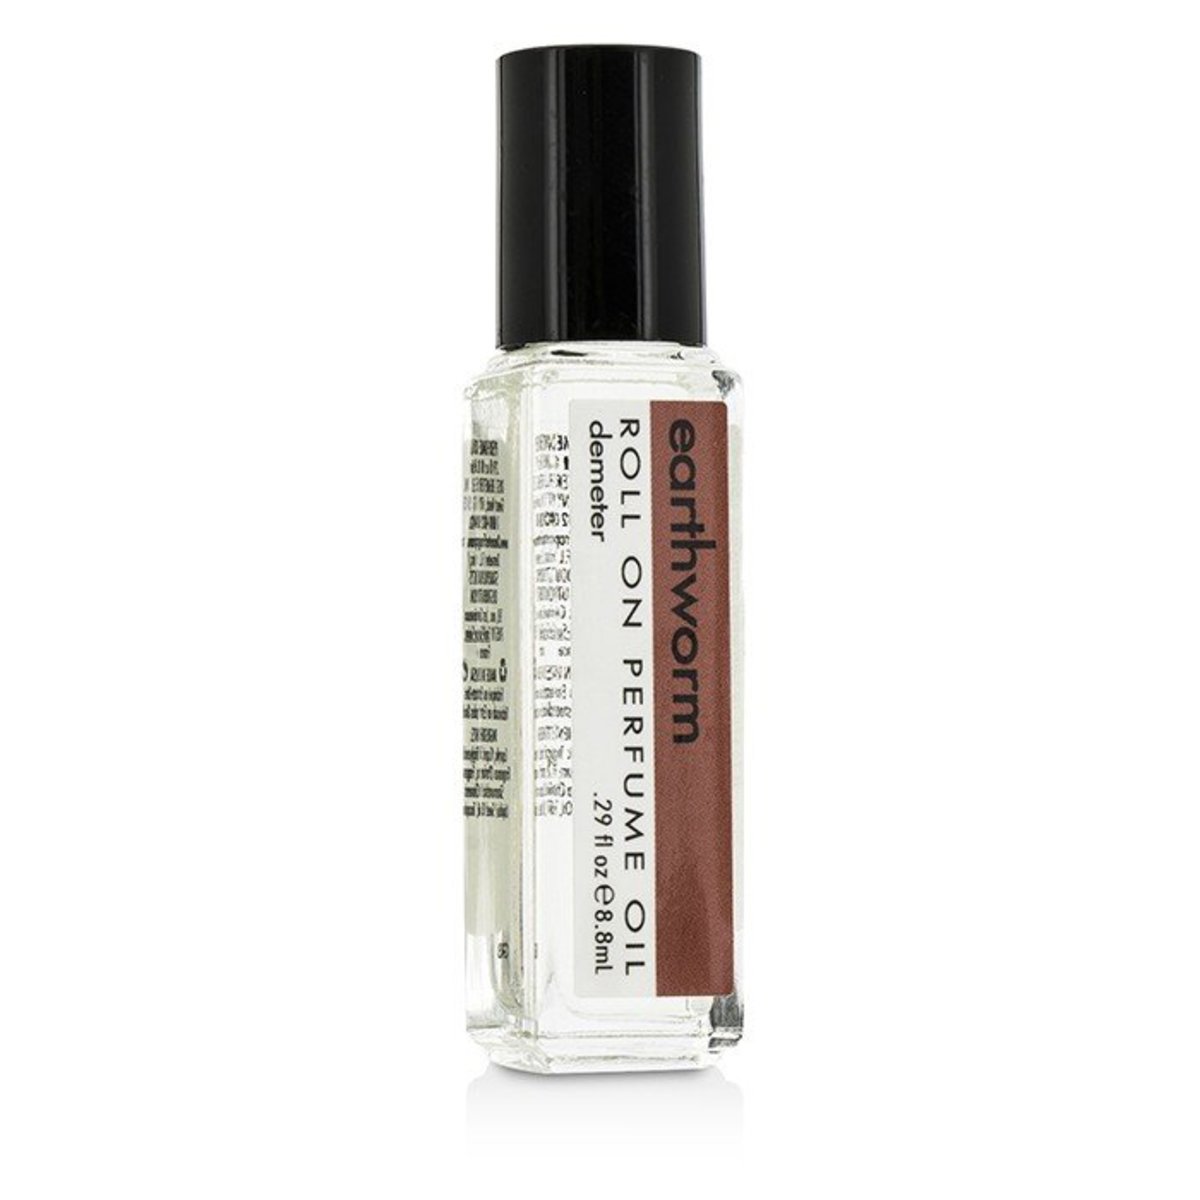 Earthworm Roll On Perfume Oil 10ml/0.33oz - [Parallel Import Product]